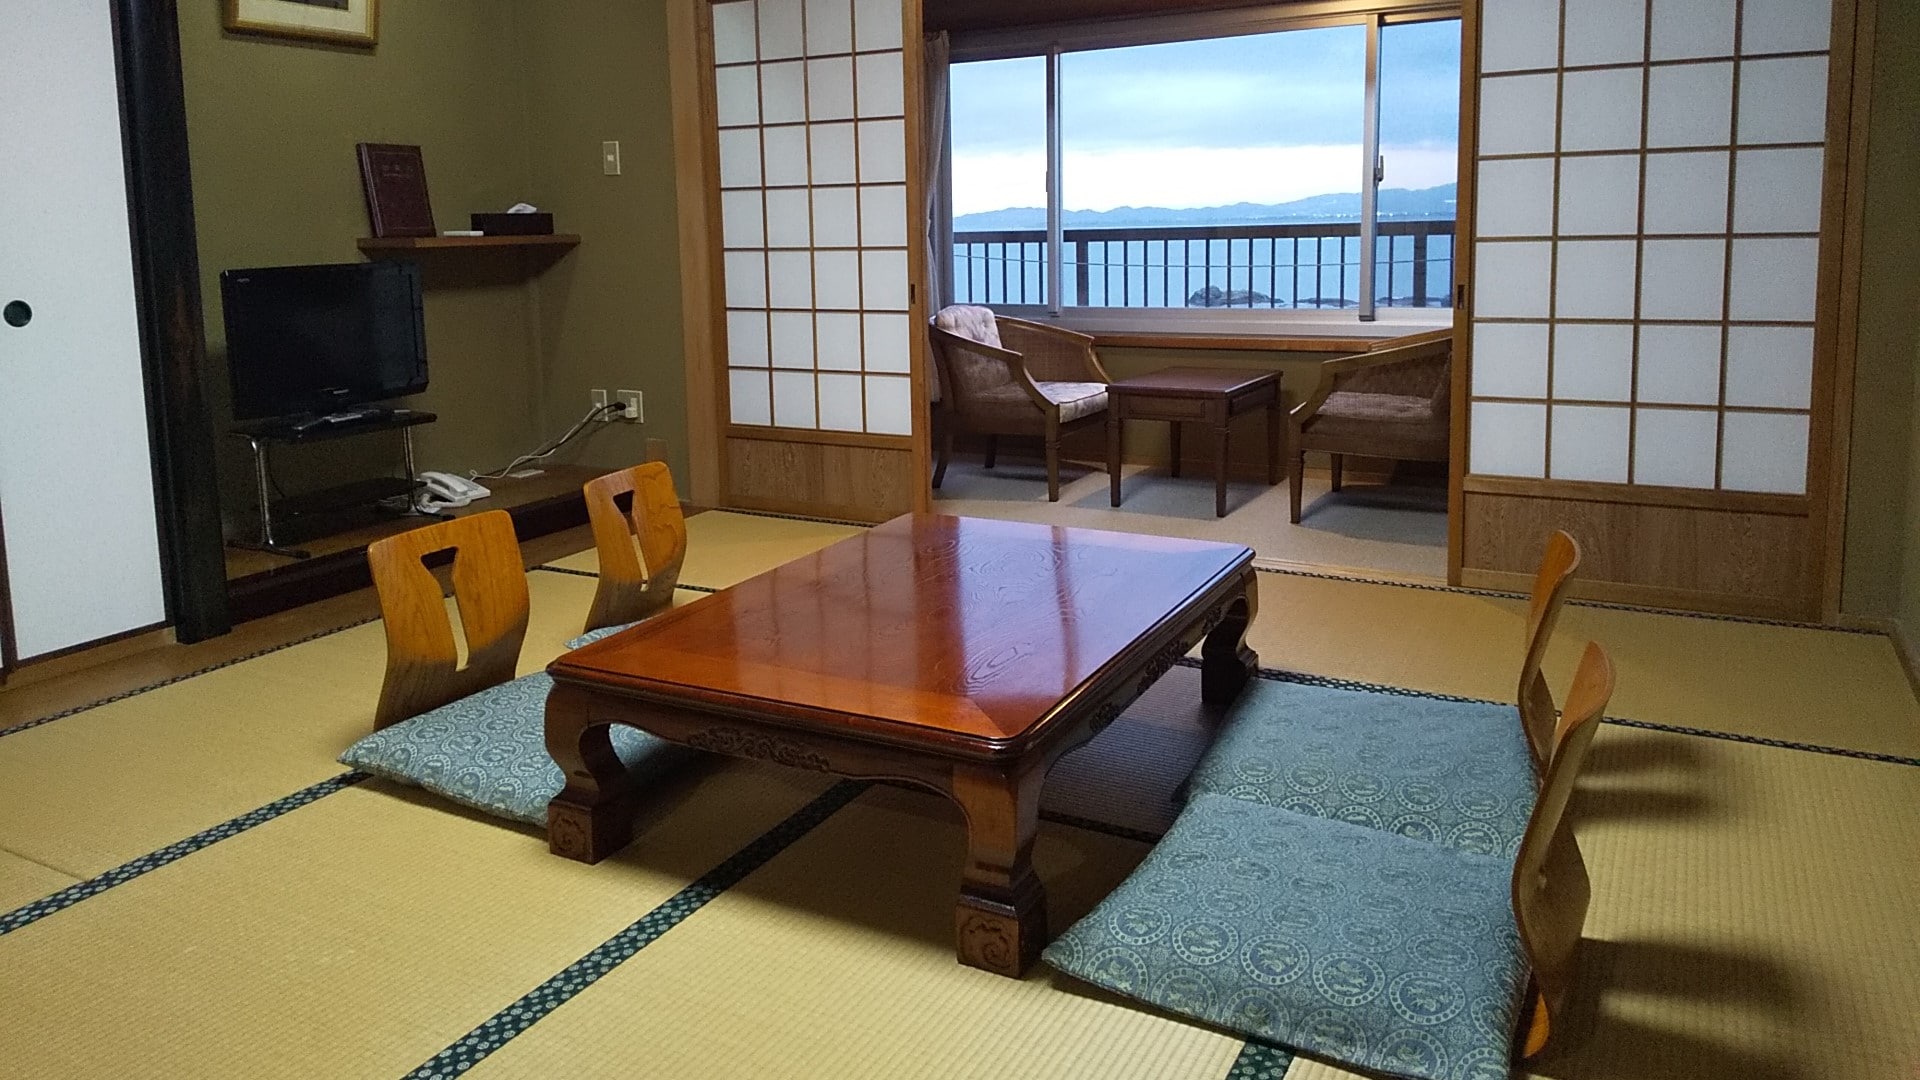 ◆ Ocean view Japanese-style room 10 tatami mats (with bath and toilet)